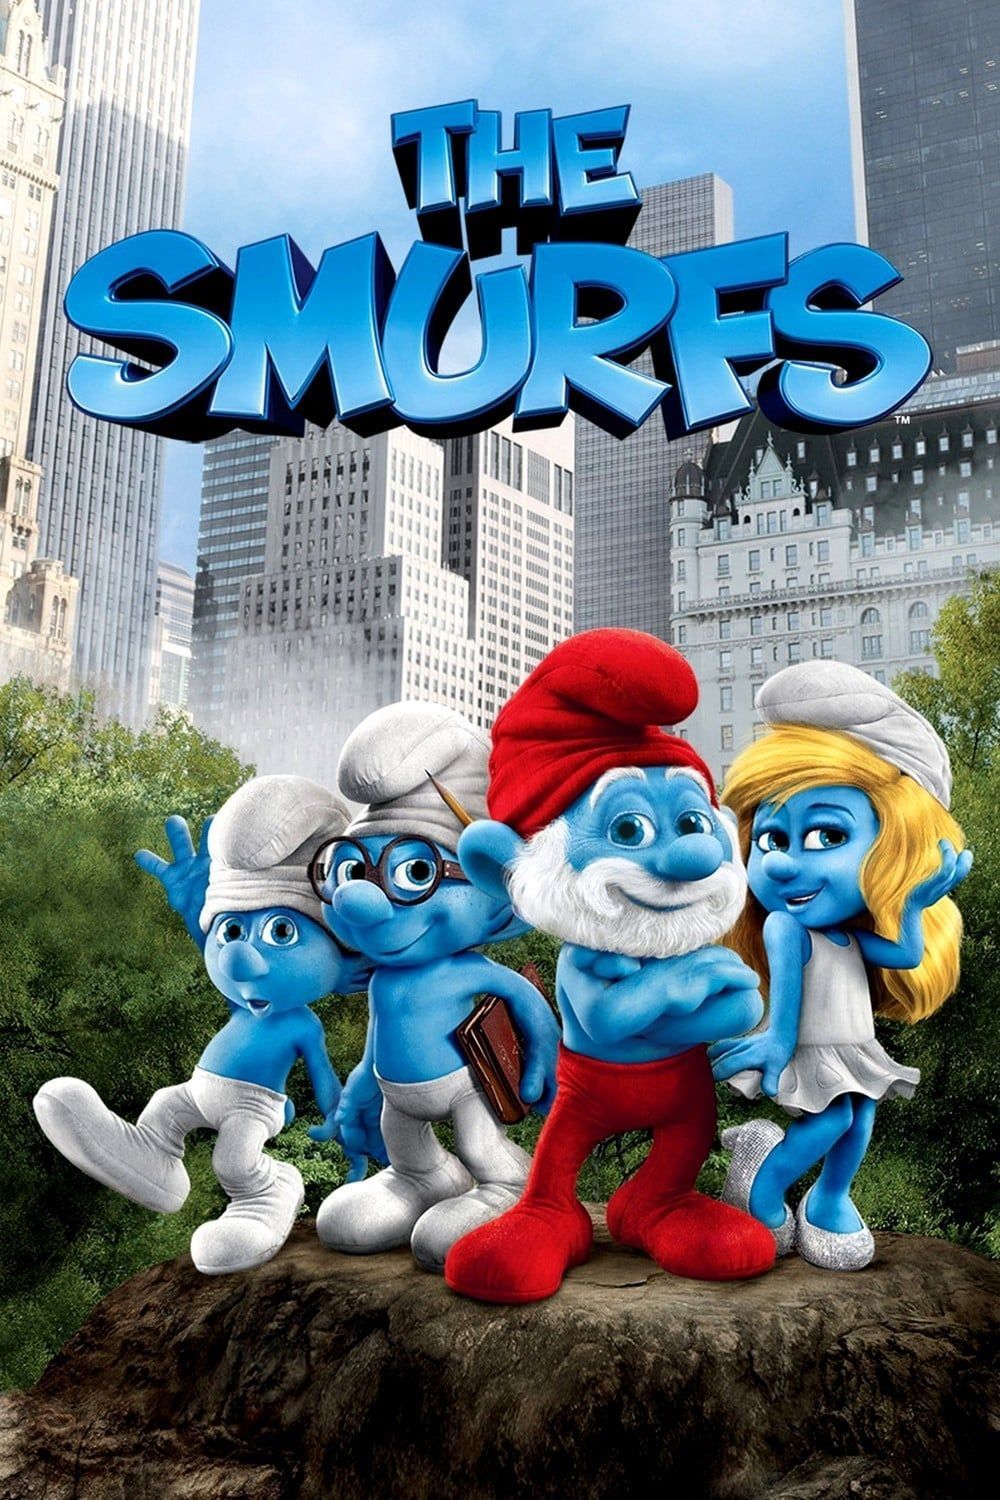 Smurfs Production Blog — Smurfing the Movie's “THEME” In my experience